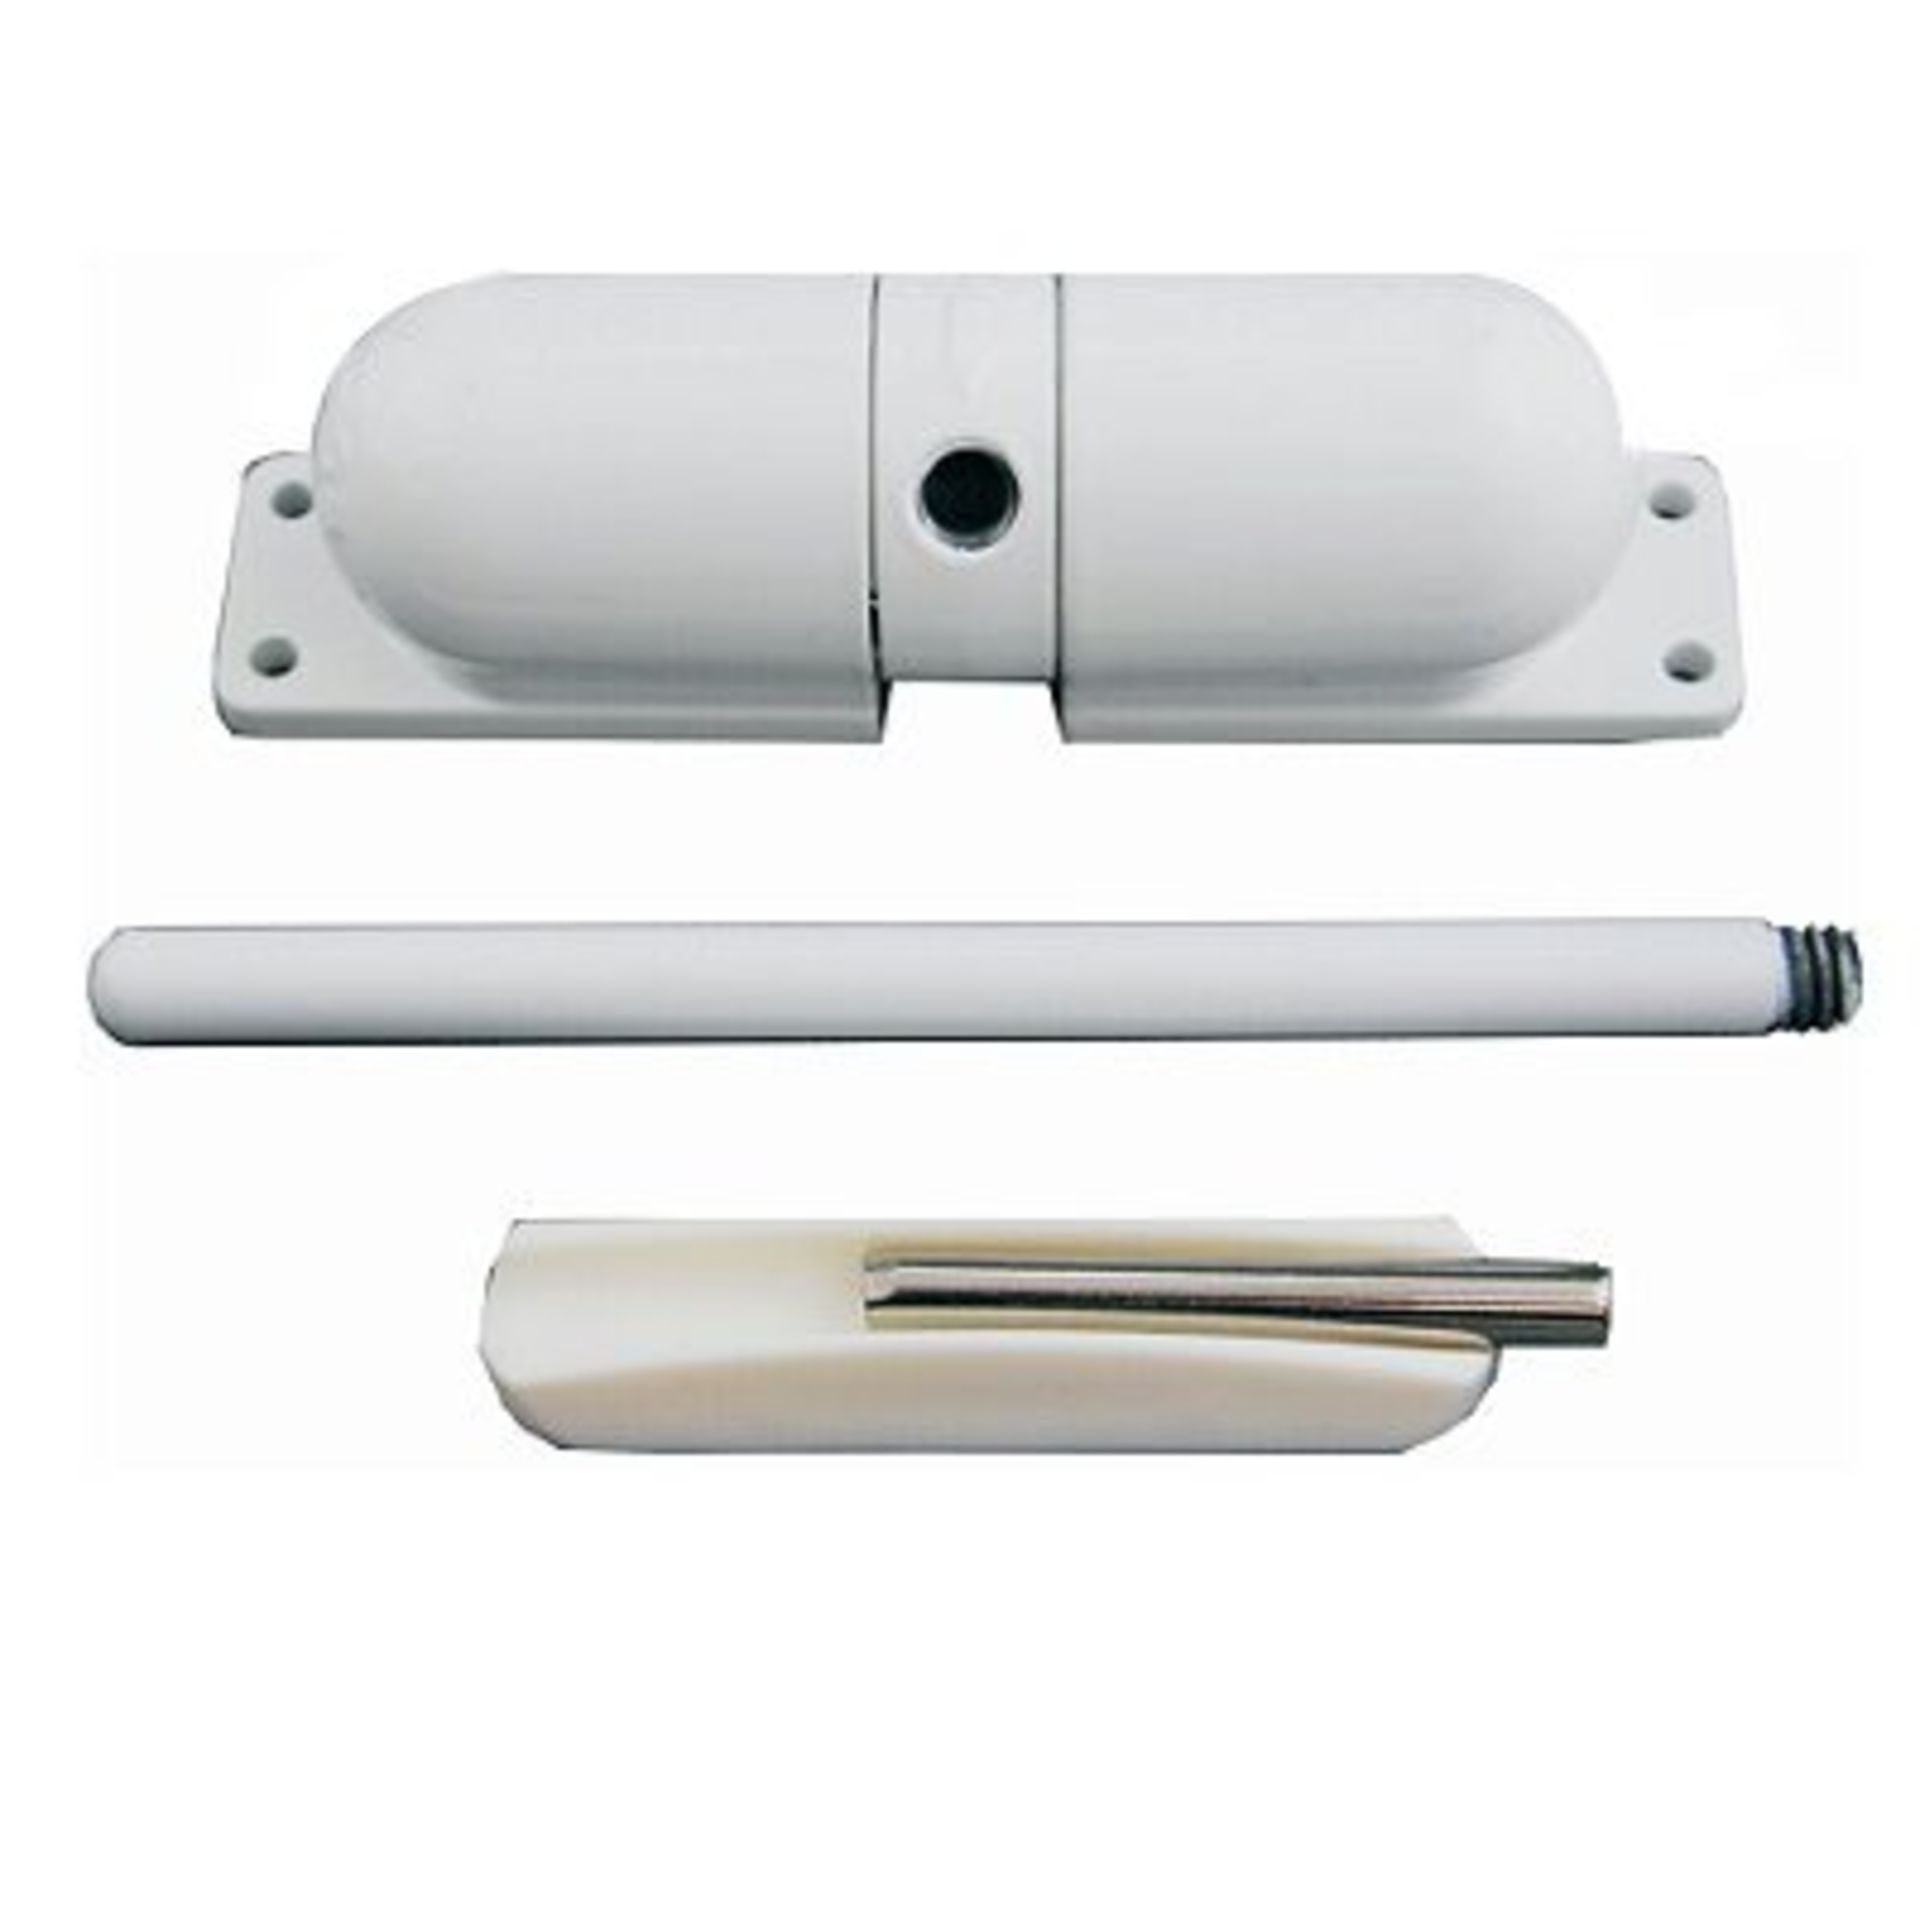 24 x Gibcloser Surface Mounted Spring Door Closer - 23.5 x 16.5 x 3.5cm White Pre-Packed VDTAZ012 |